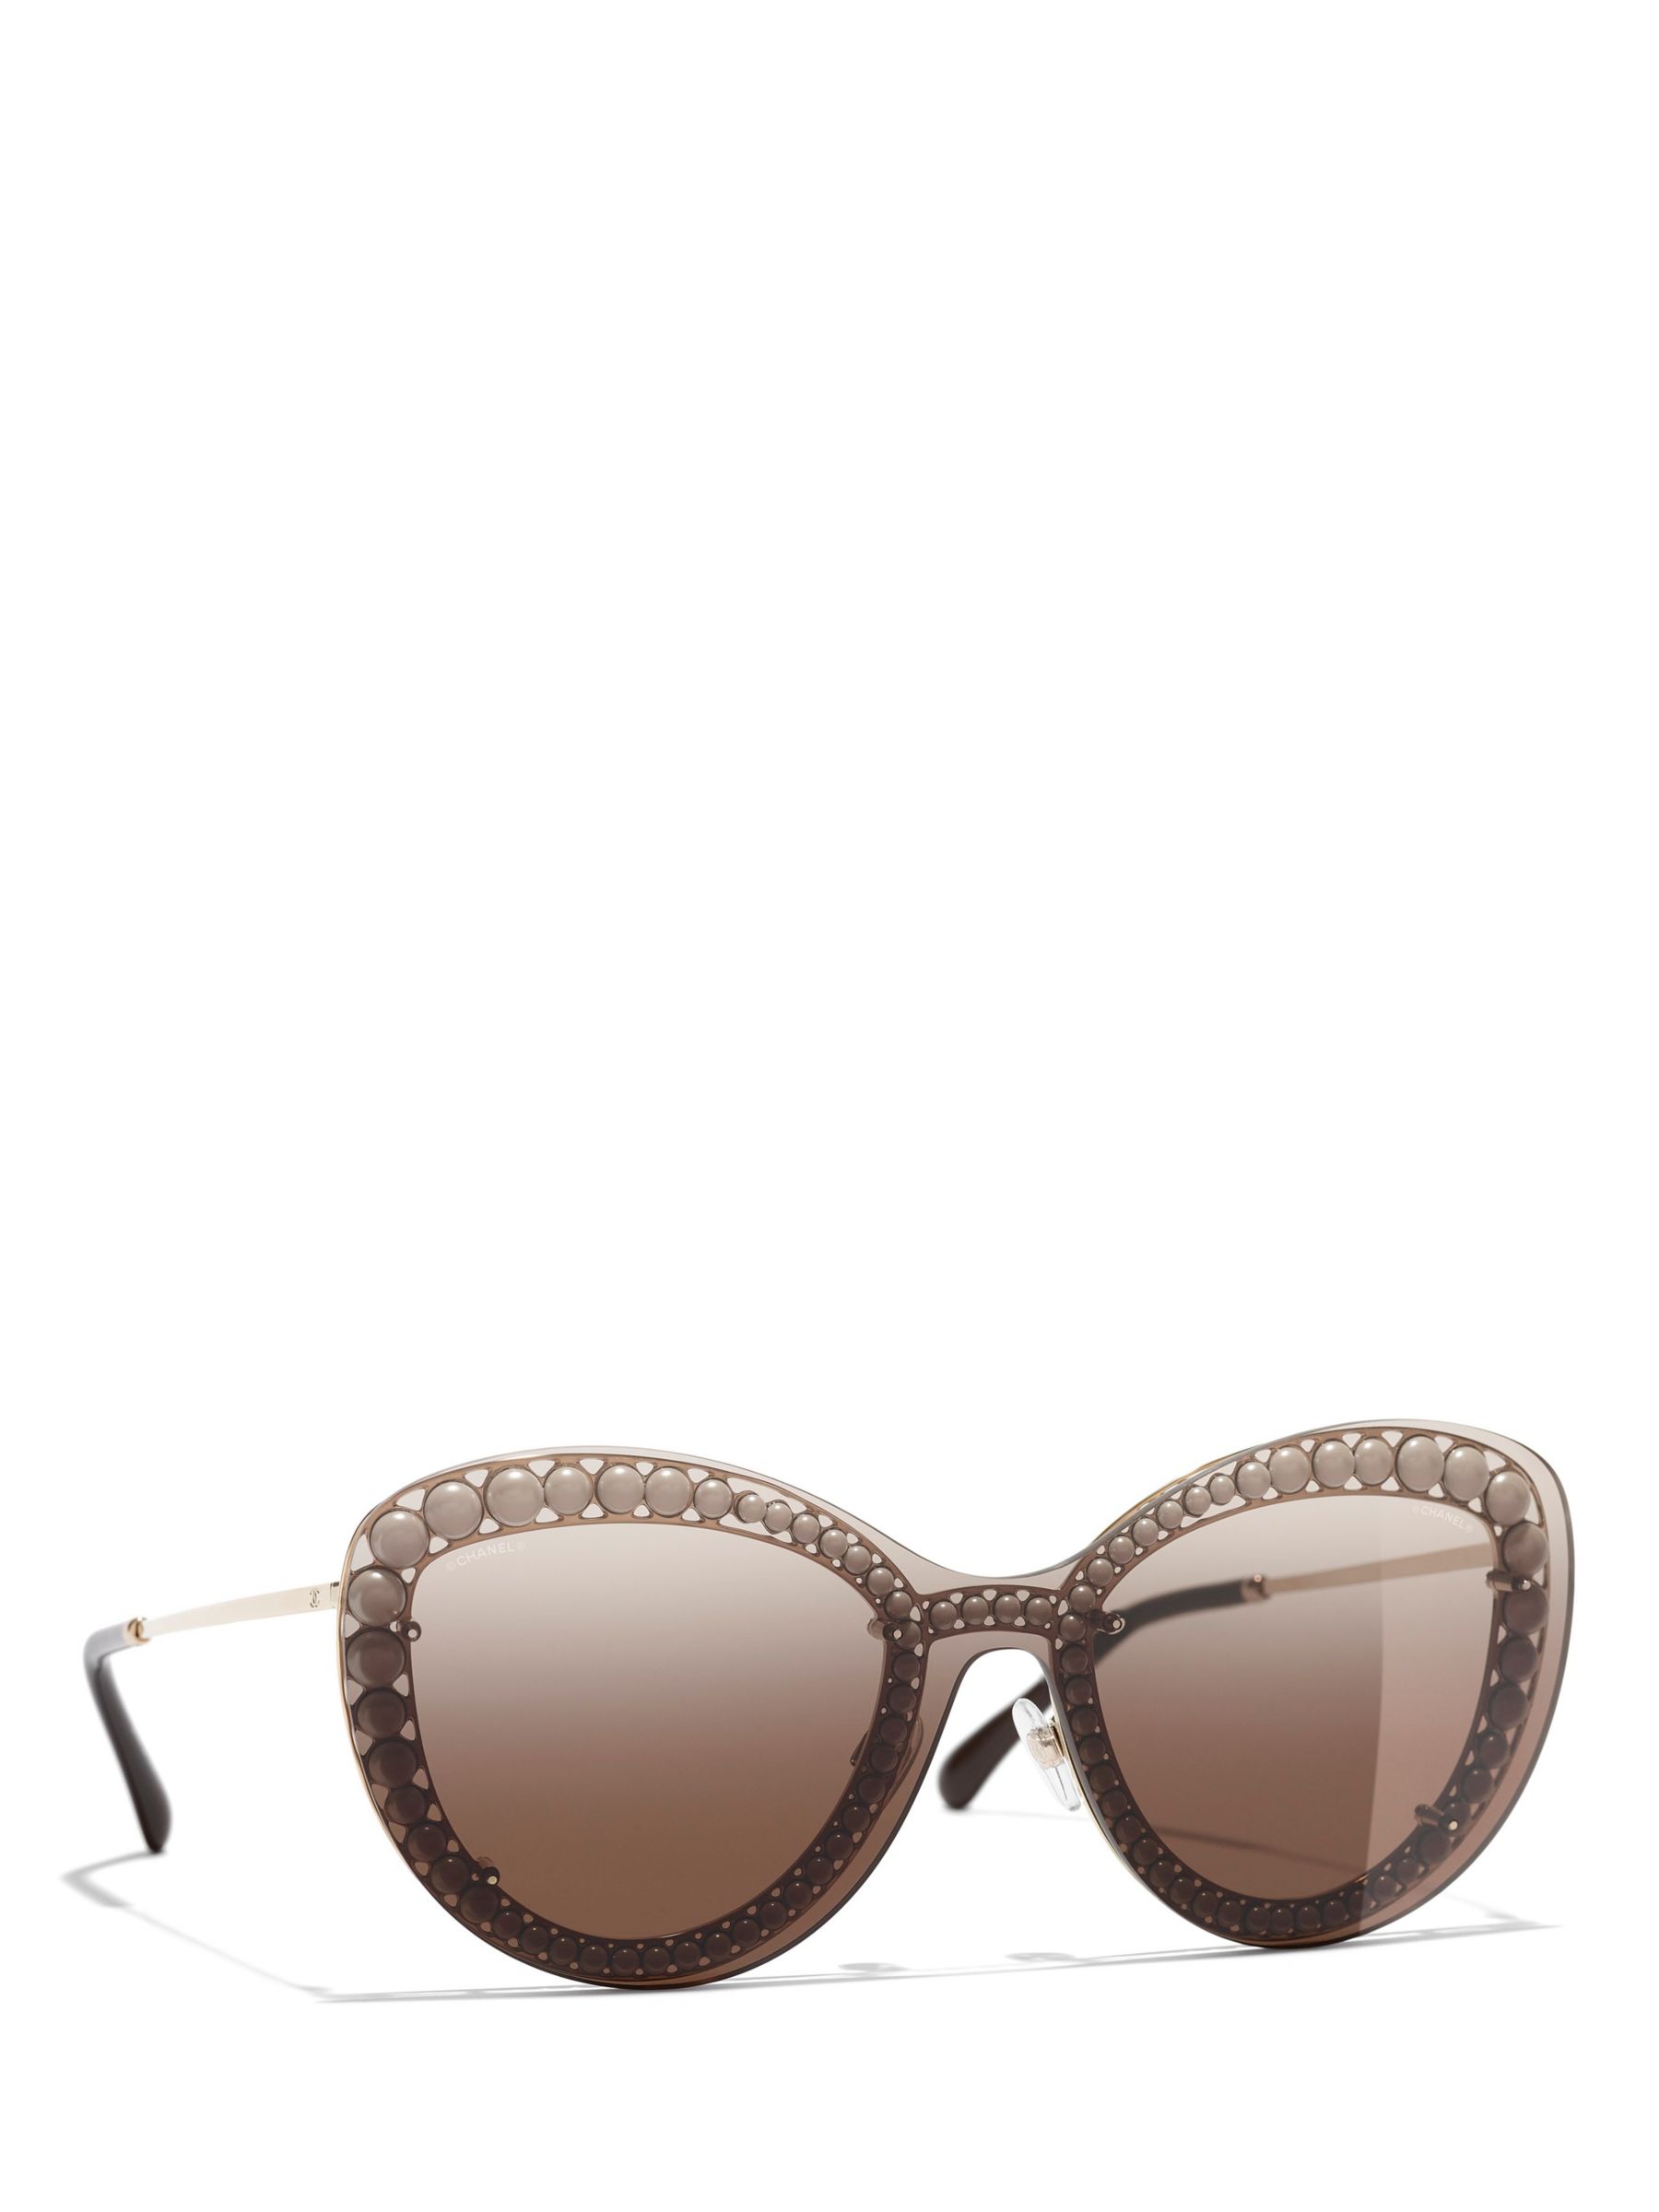 CHANEL Butterfly Sunglasses CH4236 Gold/Brown Gradient at John